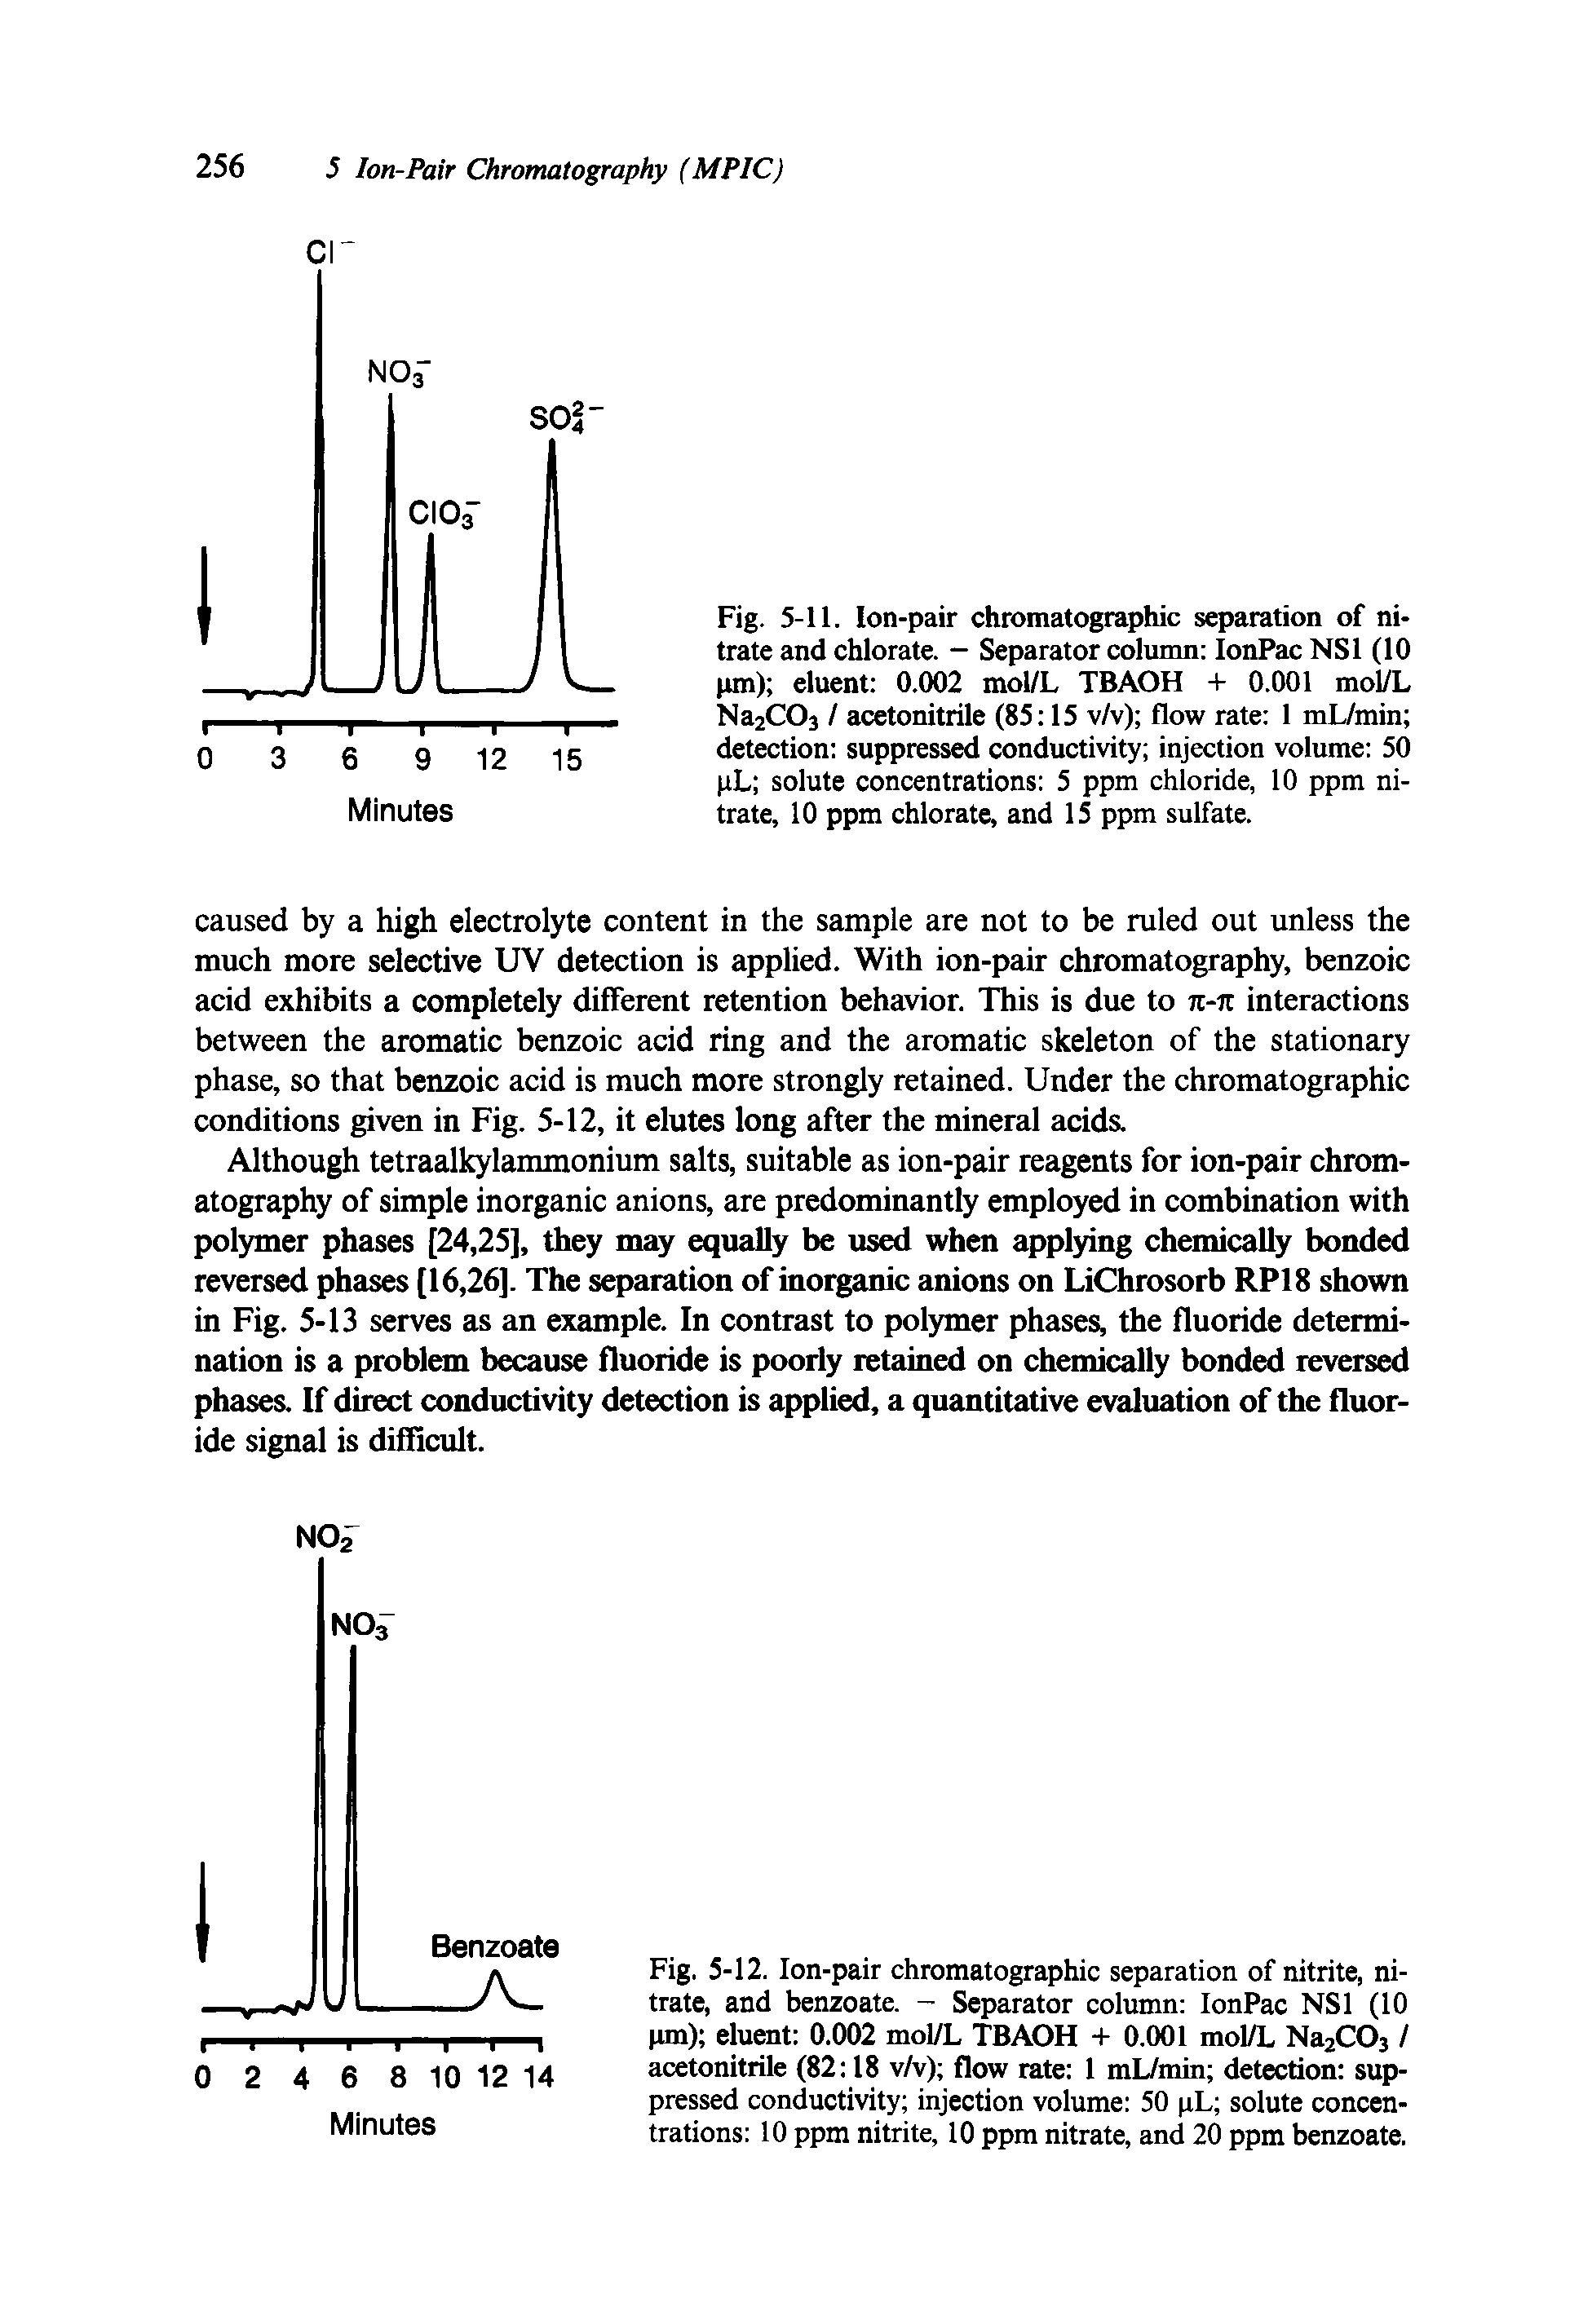 Fig. 5-11. Ion-pair chromatographic separation of nitrate and chlorate. - Separator column IonPac NS1 (10 pm) eluent 0.002 mol/L TBAOH + 0.001 mol/L Na2C03 / acetonitrile (85 15 v/v) flow rate 1 mL/min detection suppressed conductivity injection volume 50 pL solute concentrations 5 ppm chloride, 10 ppm nitrate, 10 ppm chlorate, and 15 ppm sulfate.